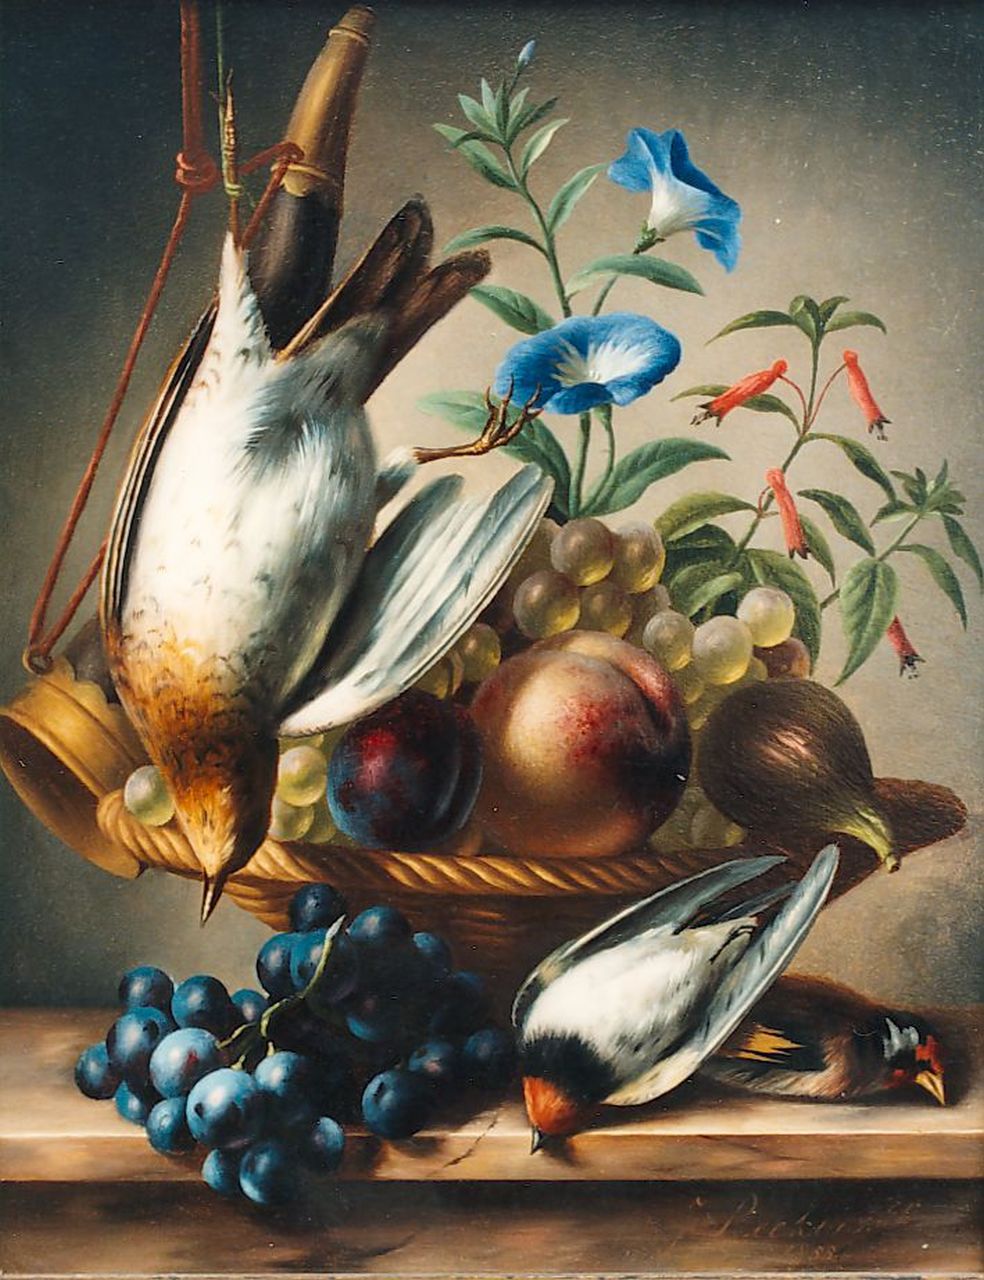 Reekers jr. Joh.  | Johannes Reekers jr., A still life, oil on panel 36.8 x 29.2 cm, signed l.r. and dated '55